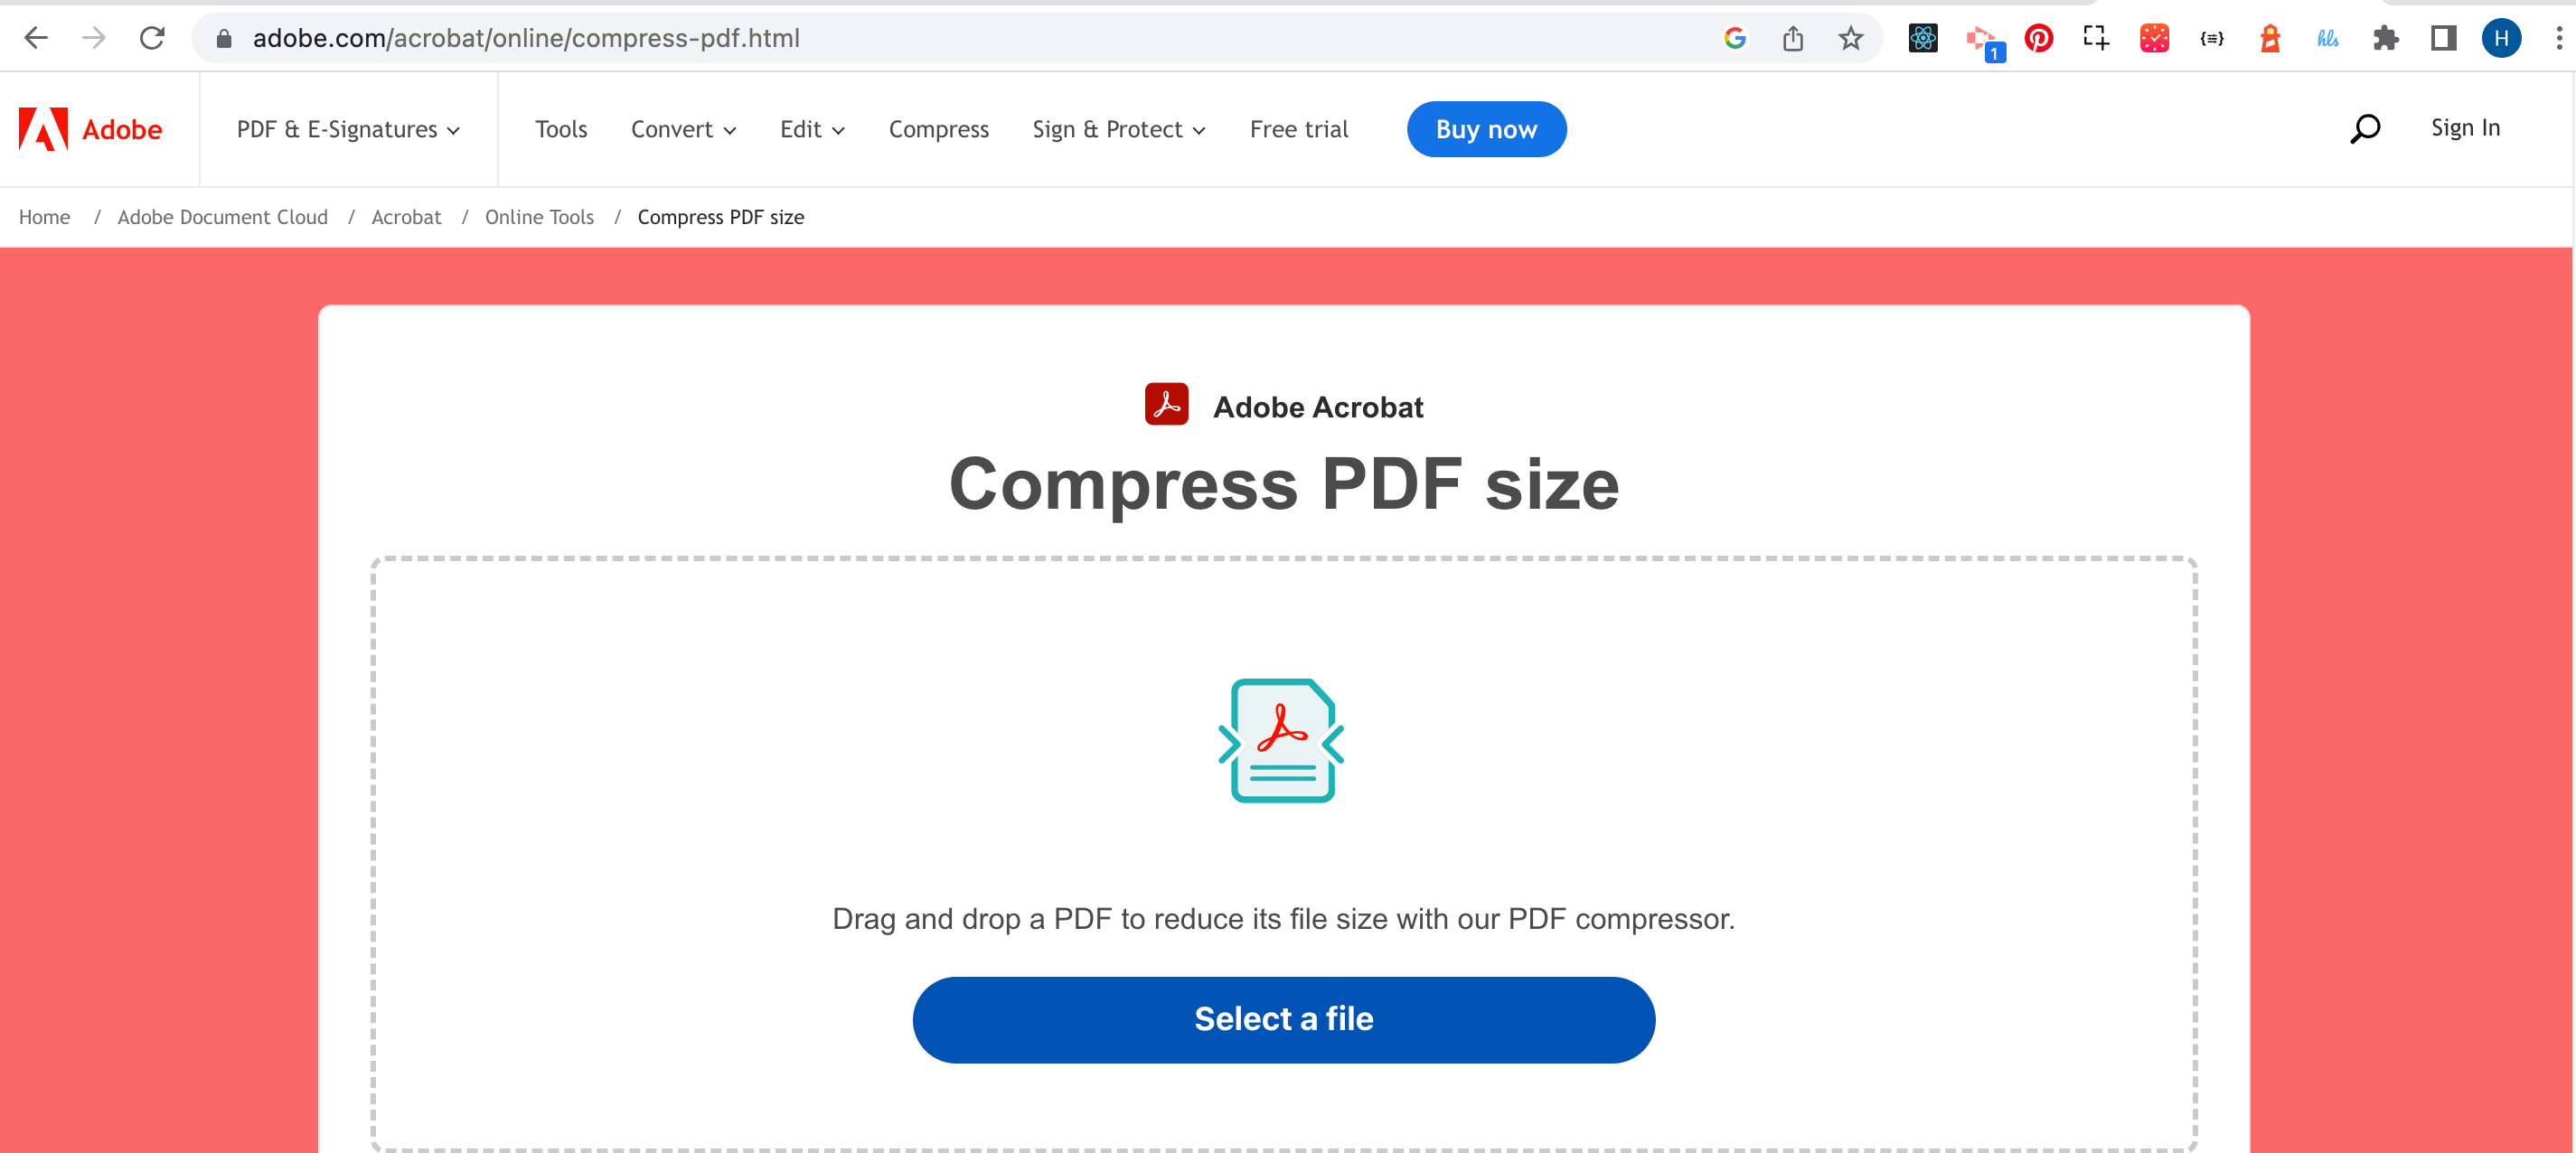 How To Use Online PDF Compressors: Step 2